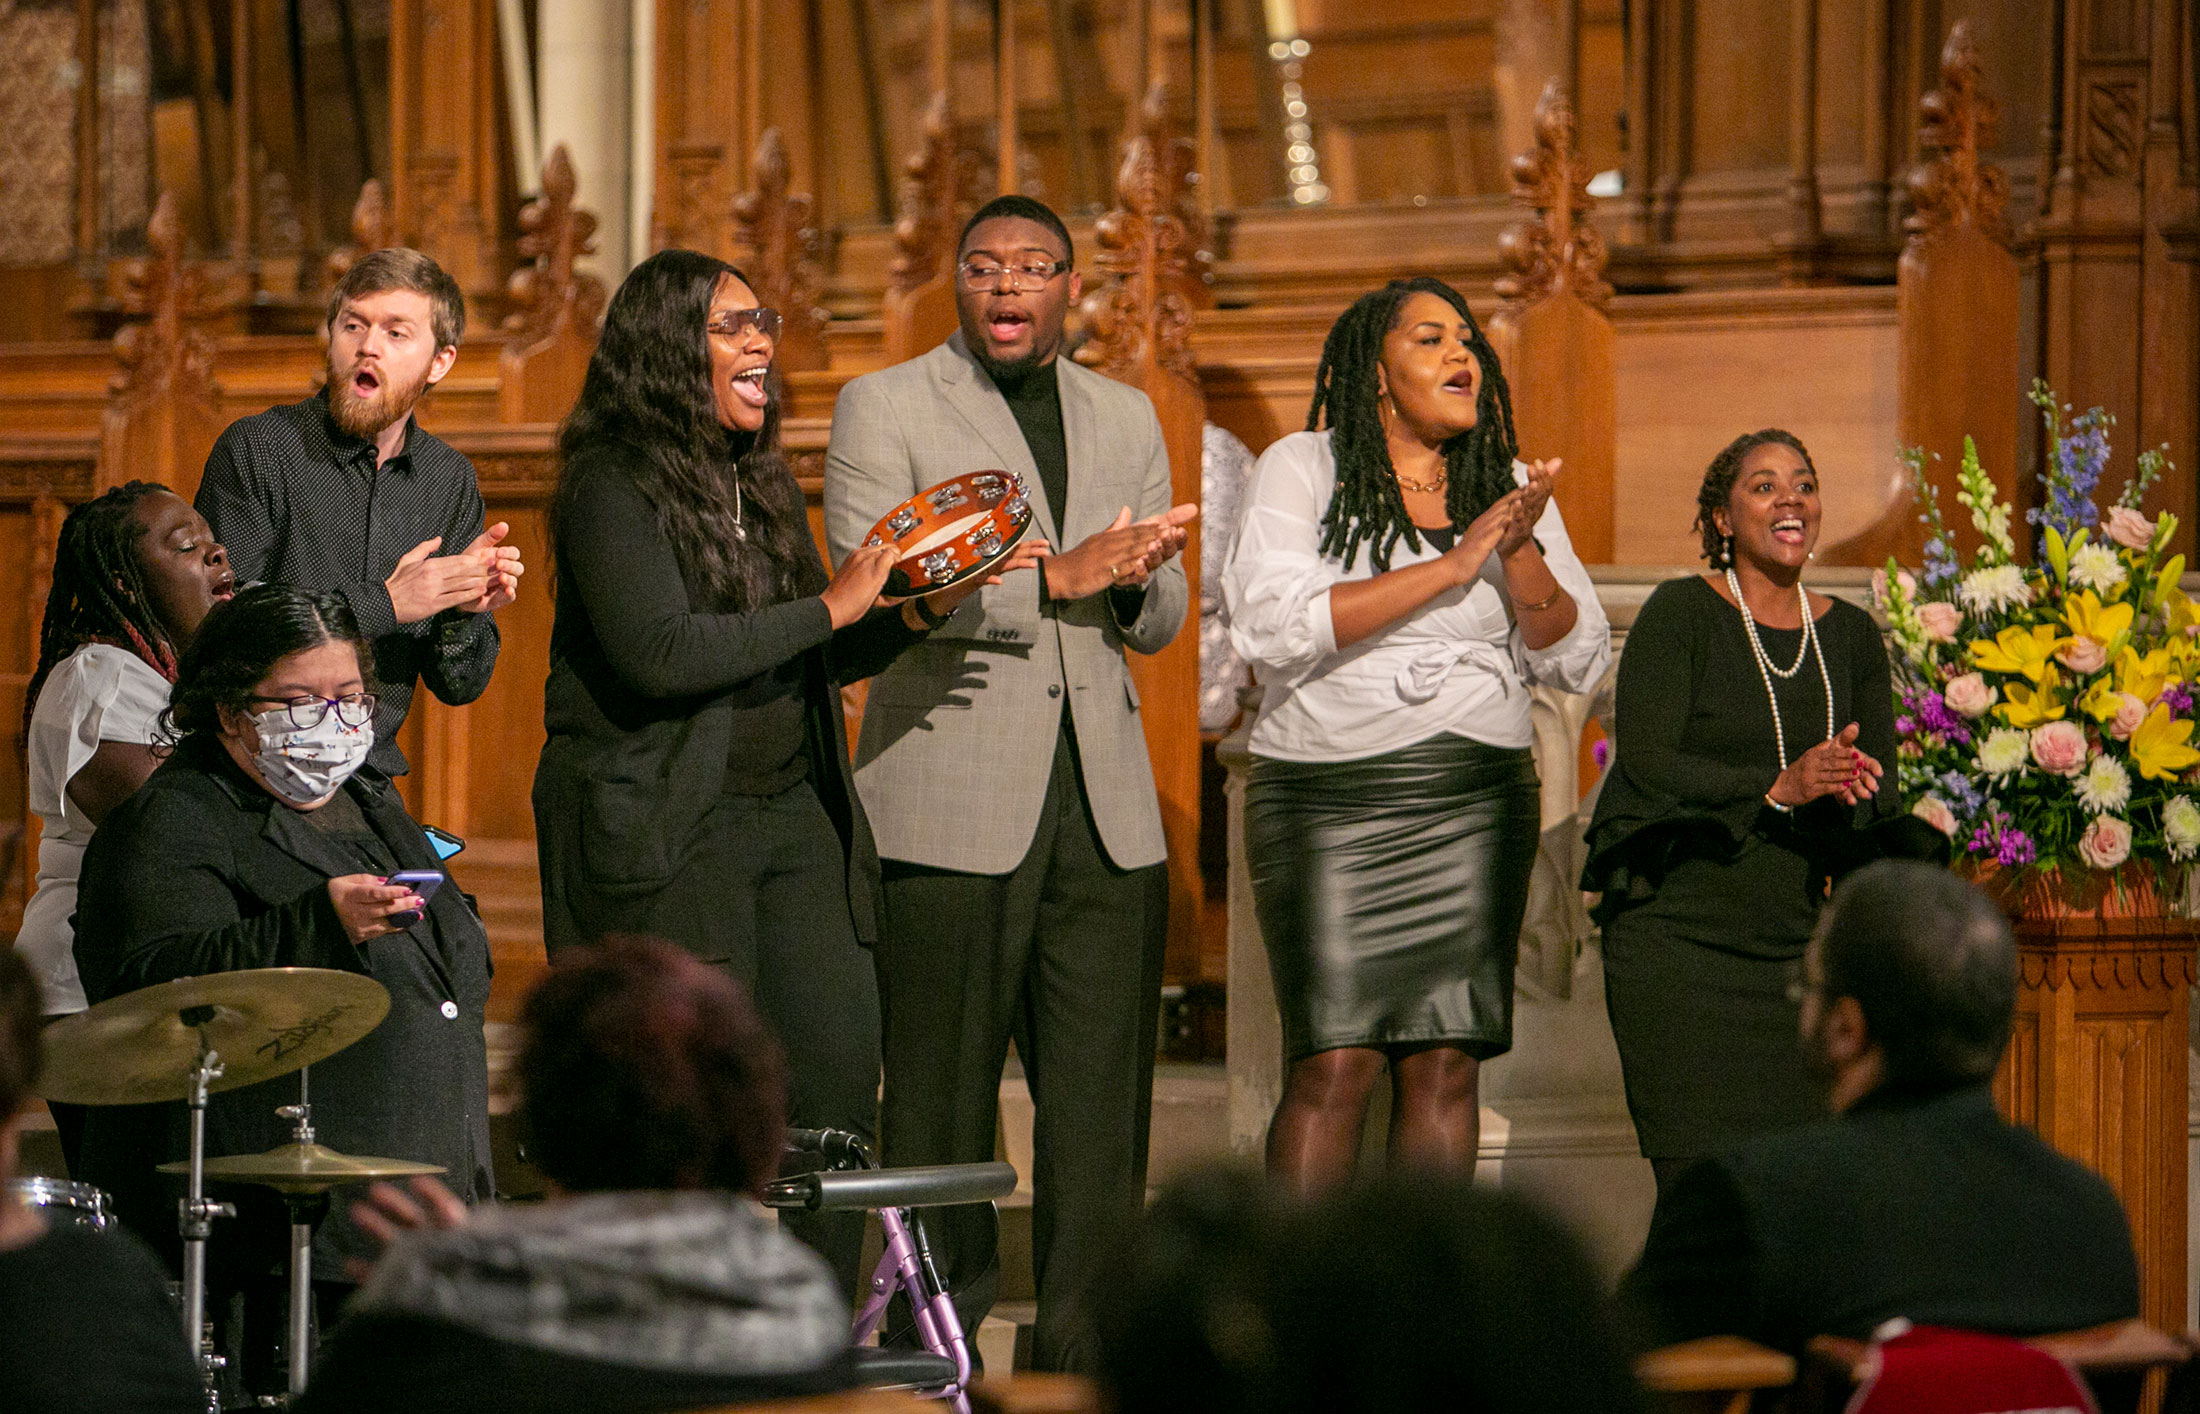 The Duke Divinity Gospel Choir performs during the King Commemoration service Sunday. Photo by Jared Lazarus.